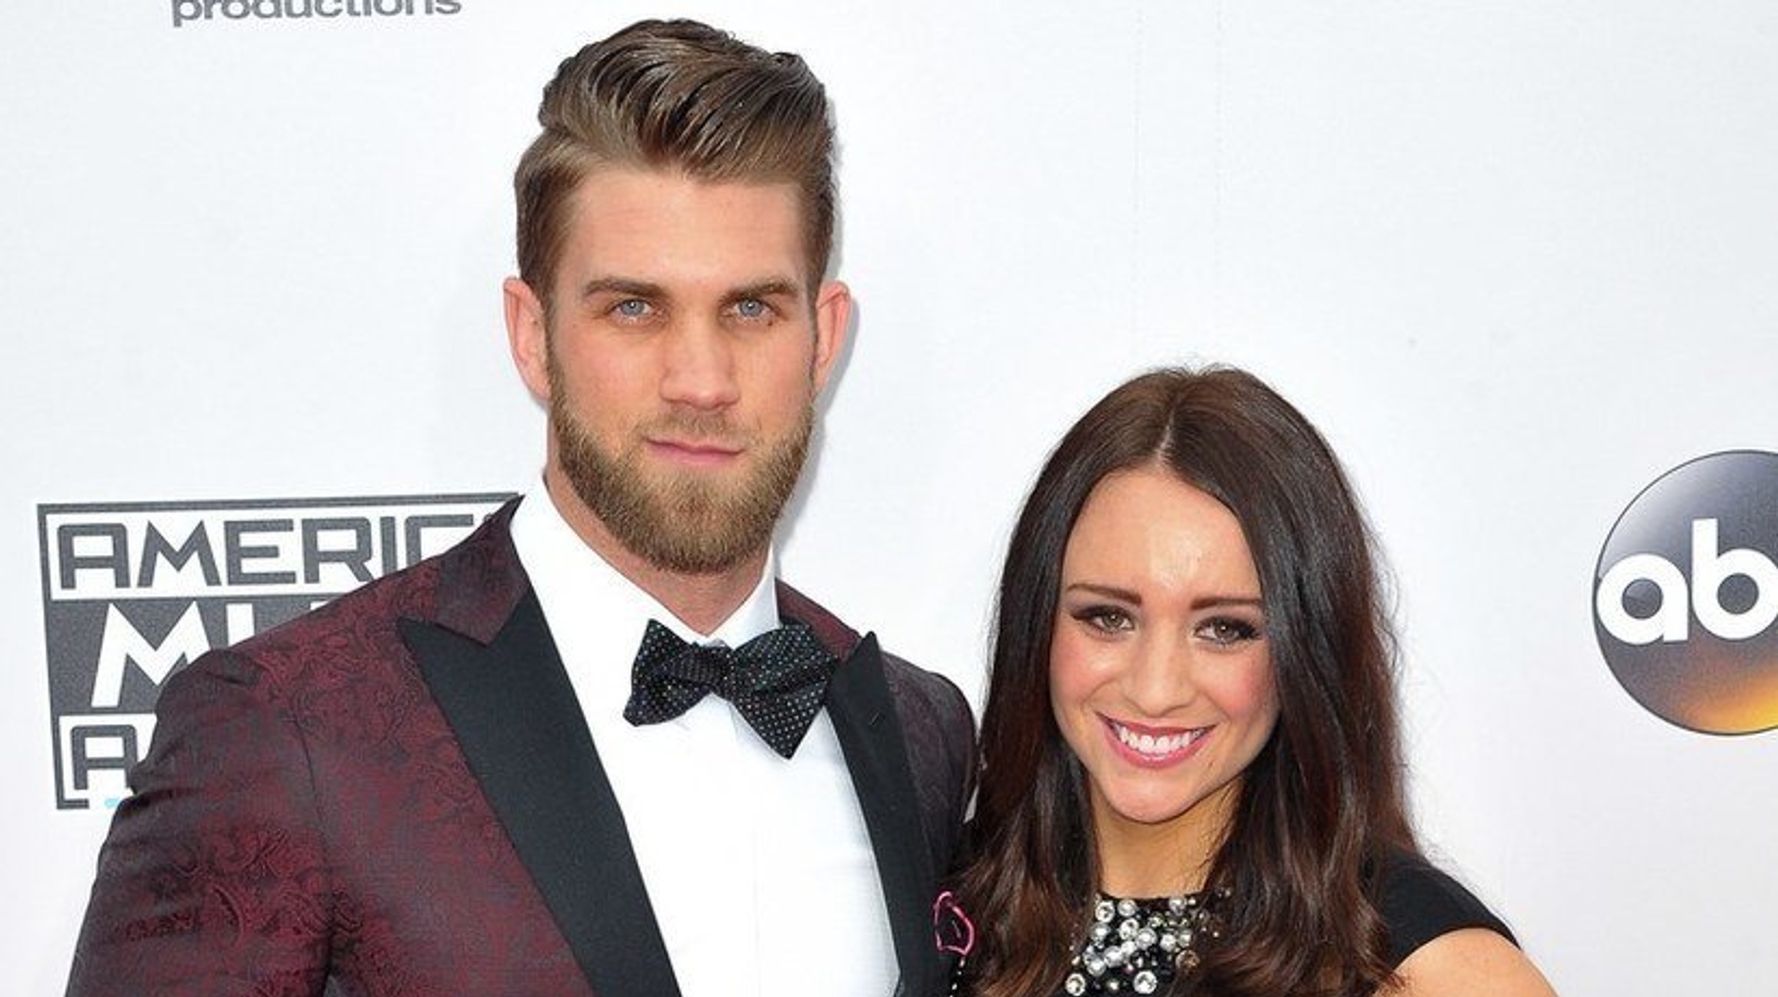 Bryce Harper has an unconventional but sweet looking jacket lining for his  wedding day